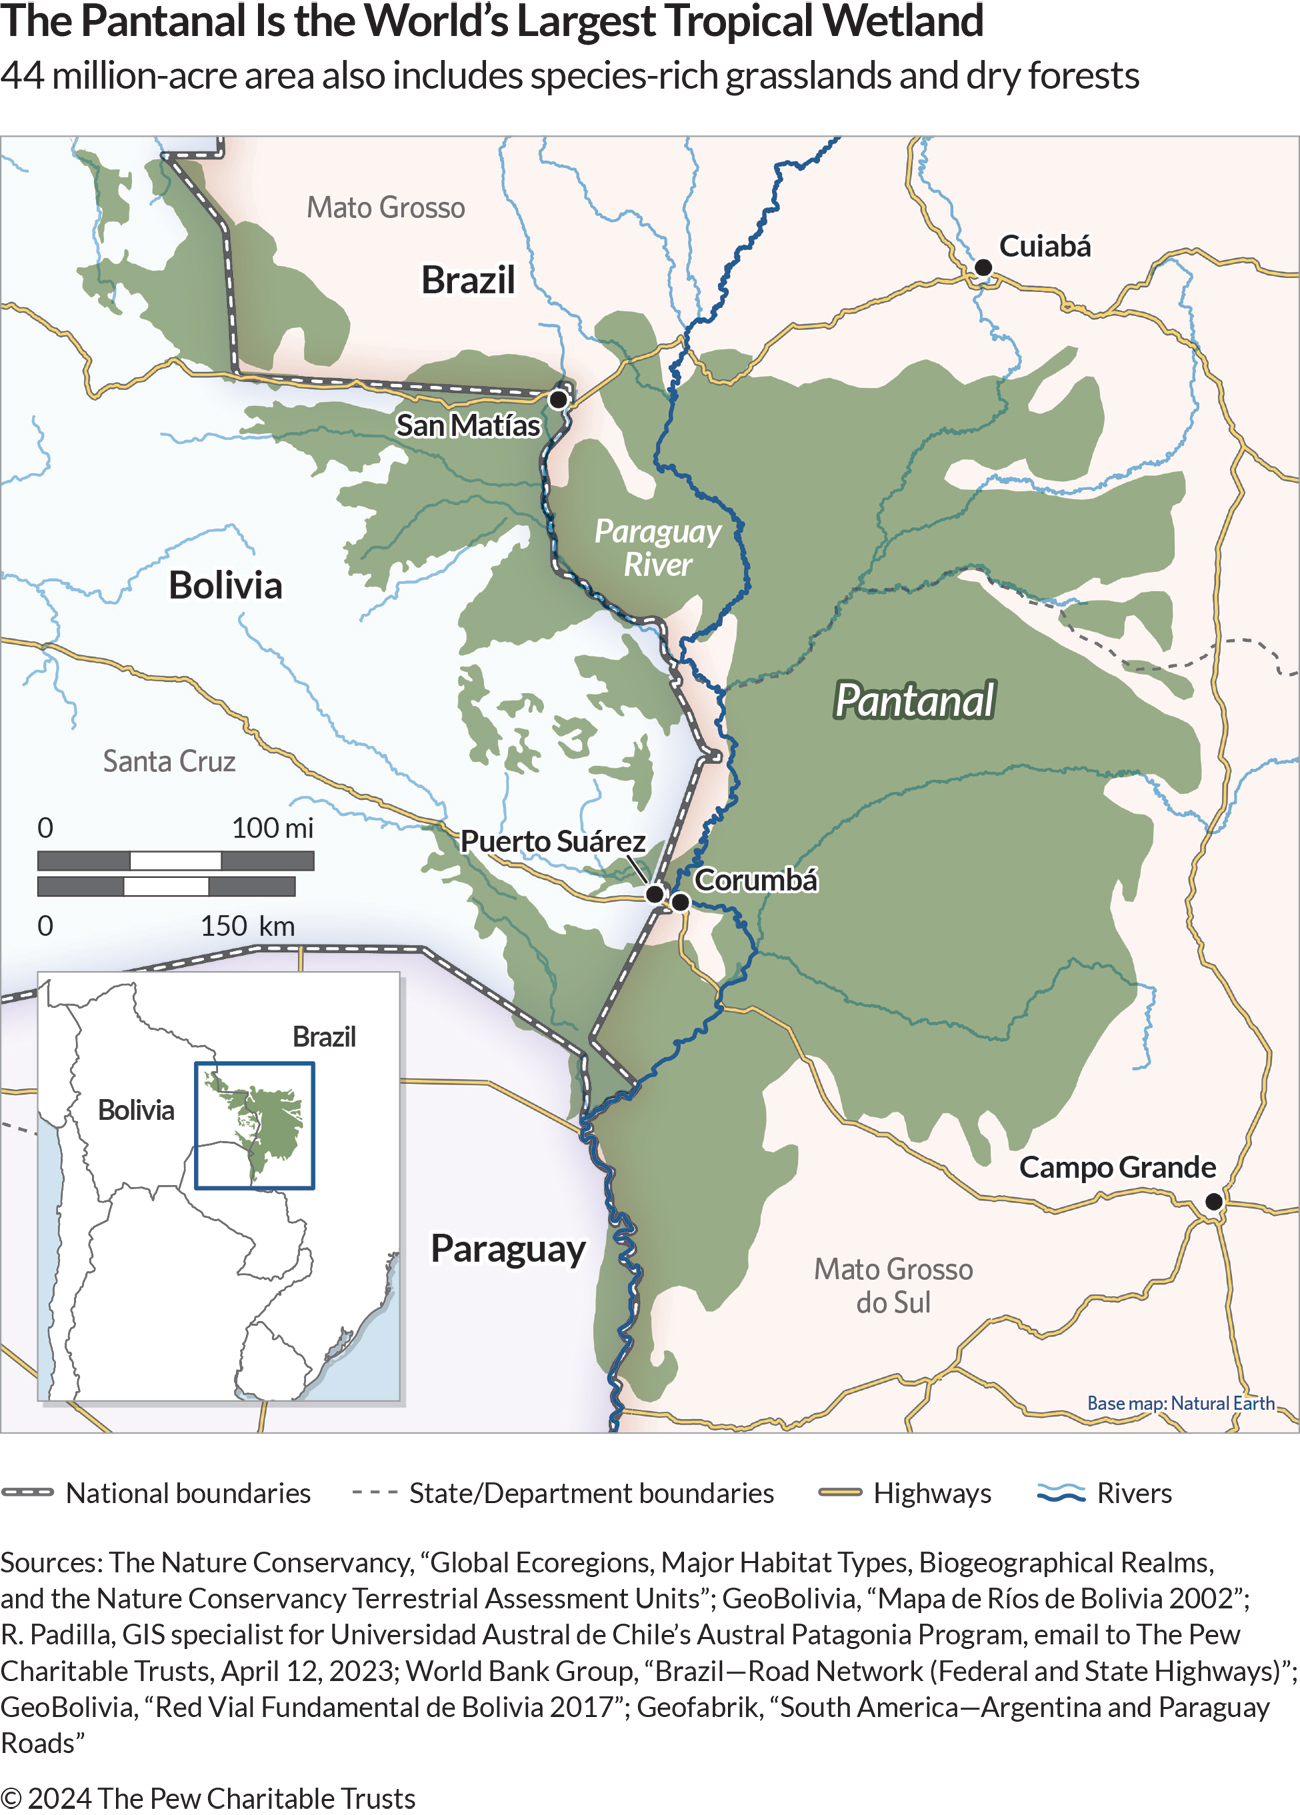 A map shows a portion of South America where Bolivia, Brazil, and Paraguay share borders, including a dark-green shaded area labeled “Pantanal.” The map also identifies the locations of some rivers, highways, cities, and states and departments. 